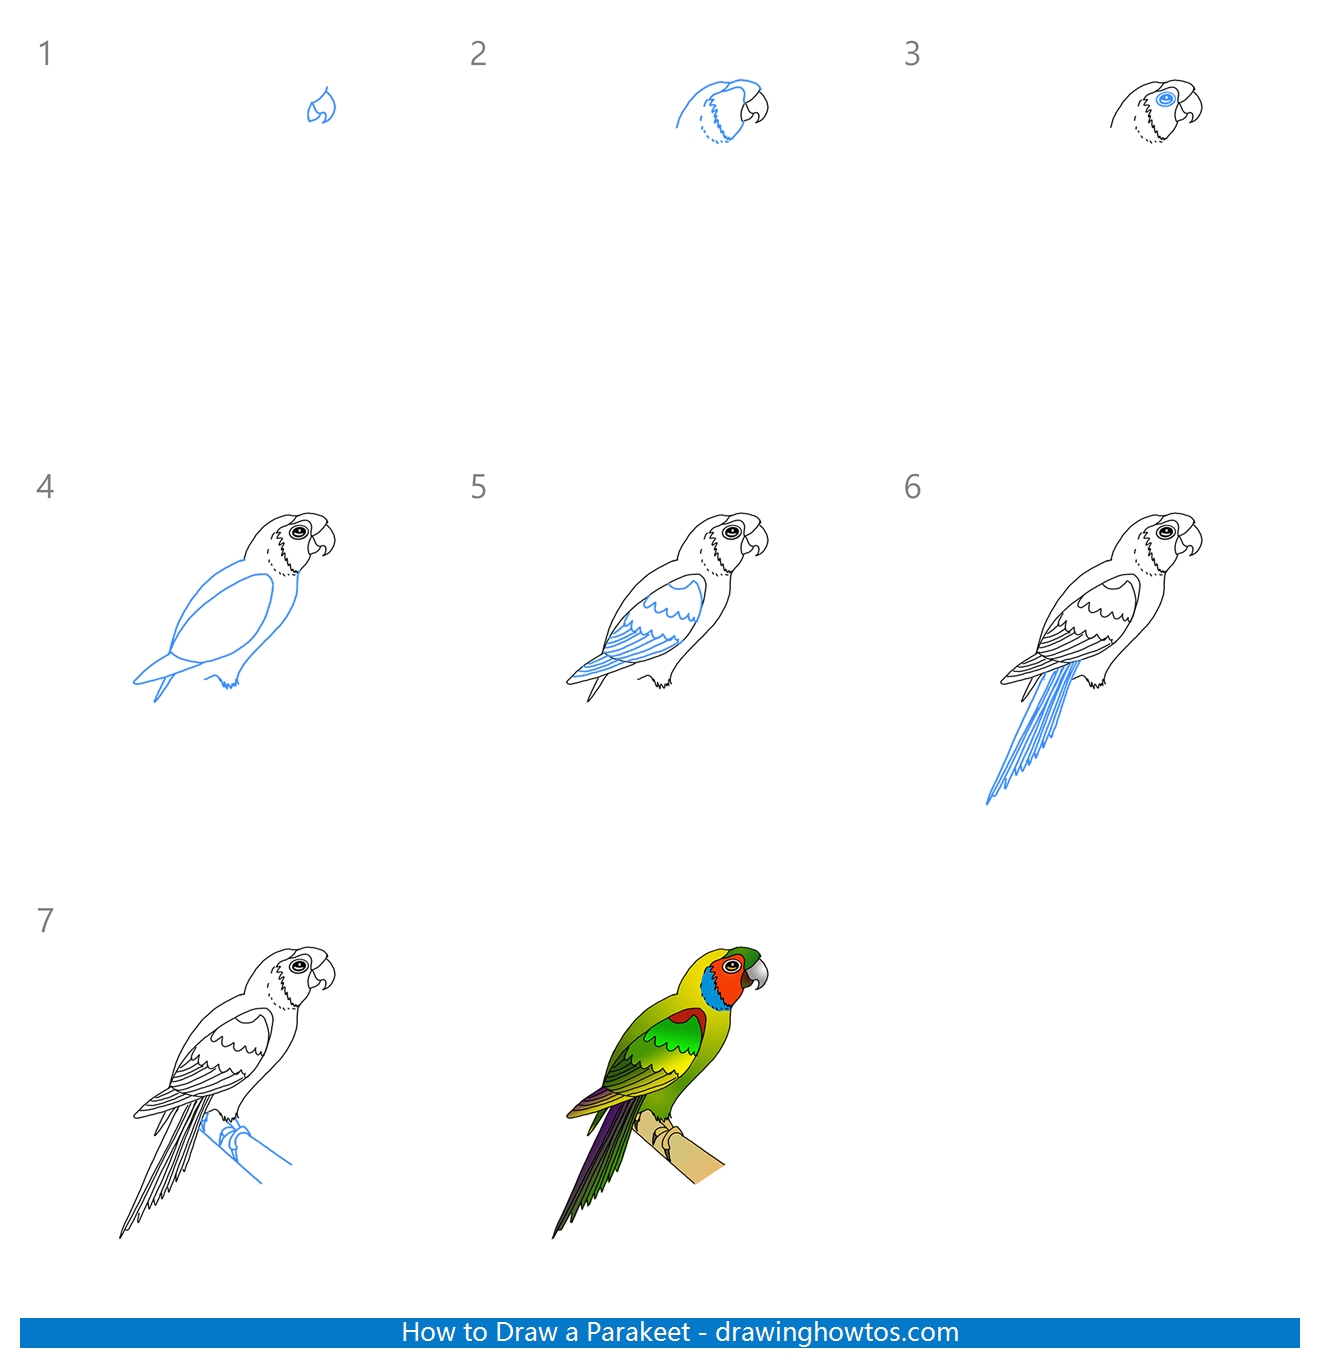 How to Draw a Parakeet Step by Step